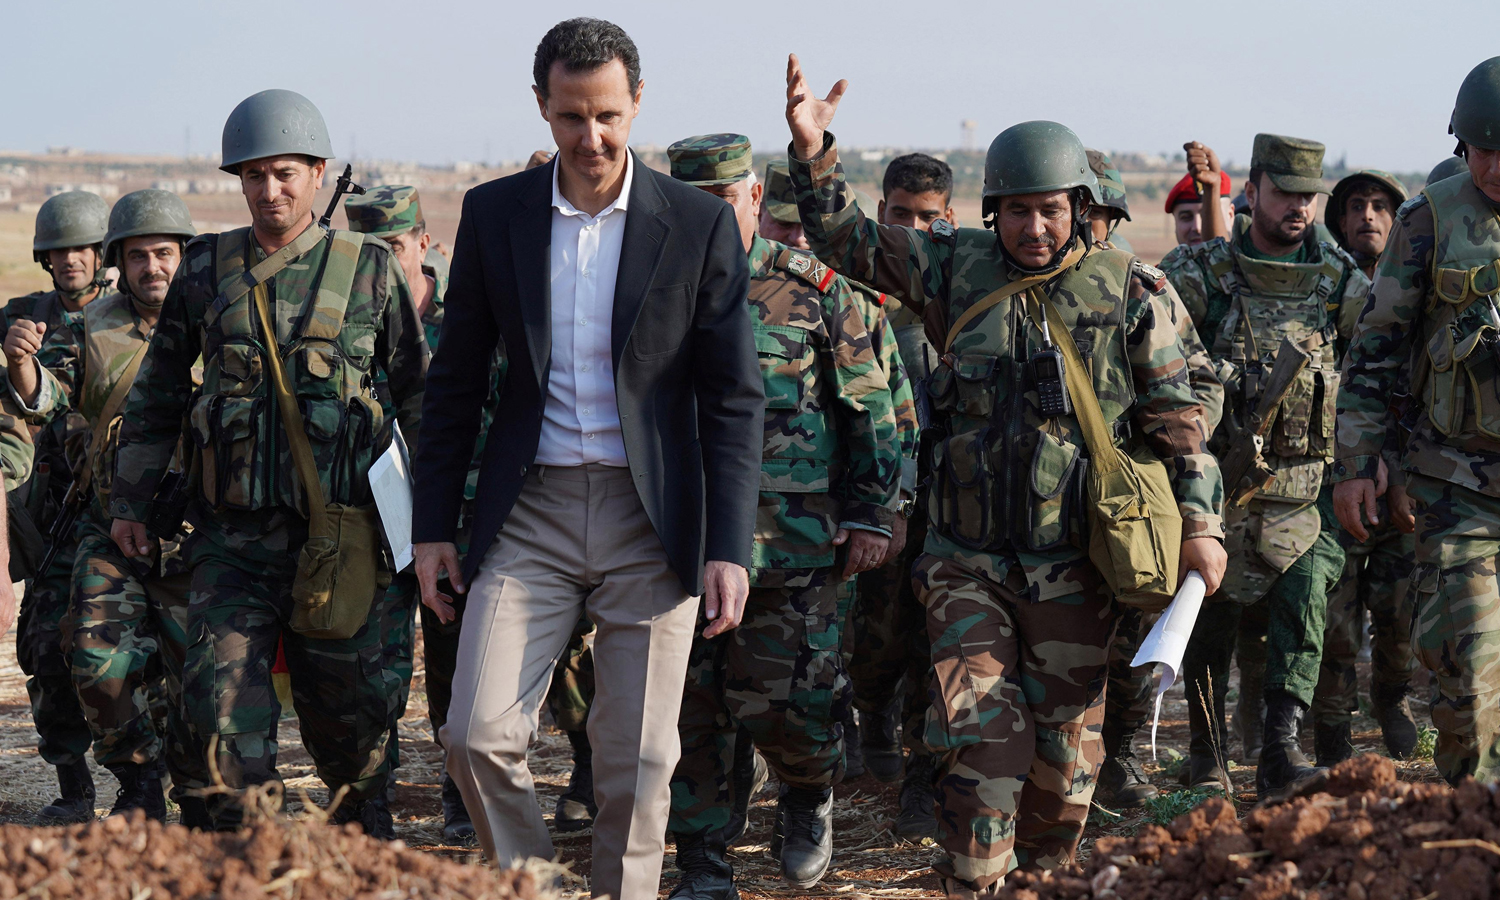 The head of the Syrian regime Bashar al-Assad visiting military units stationed in Idlib governorate in northwestern Syria - 23 October 2019 (SANA)